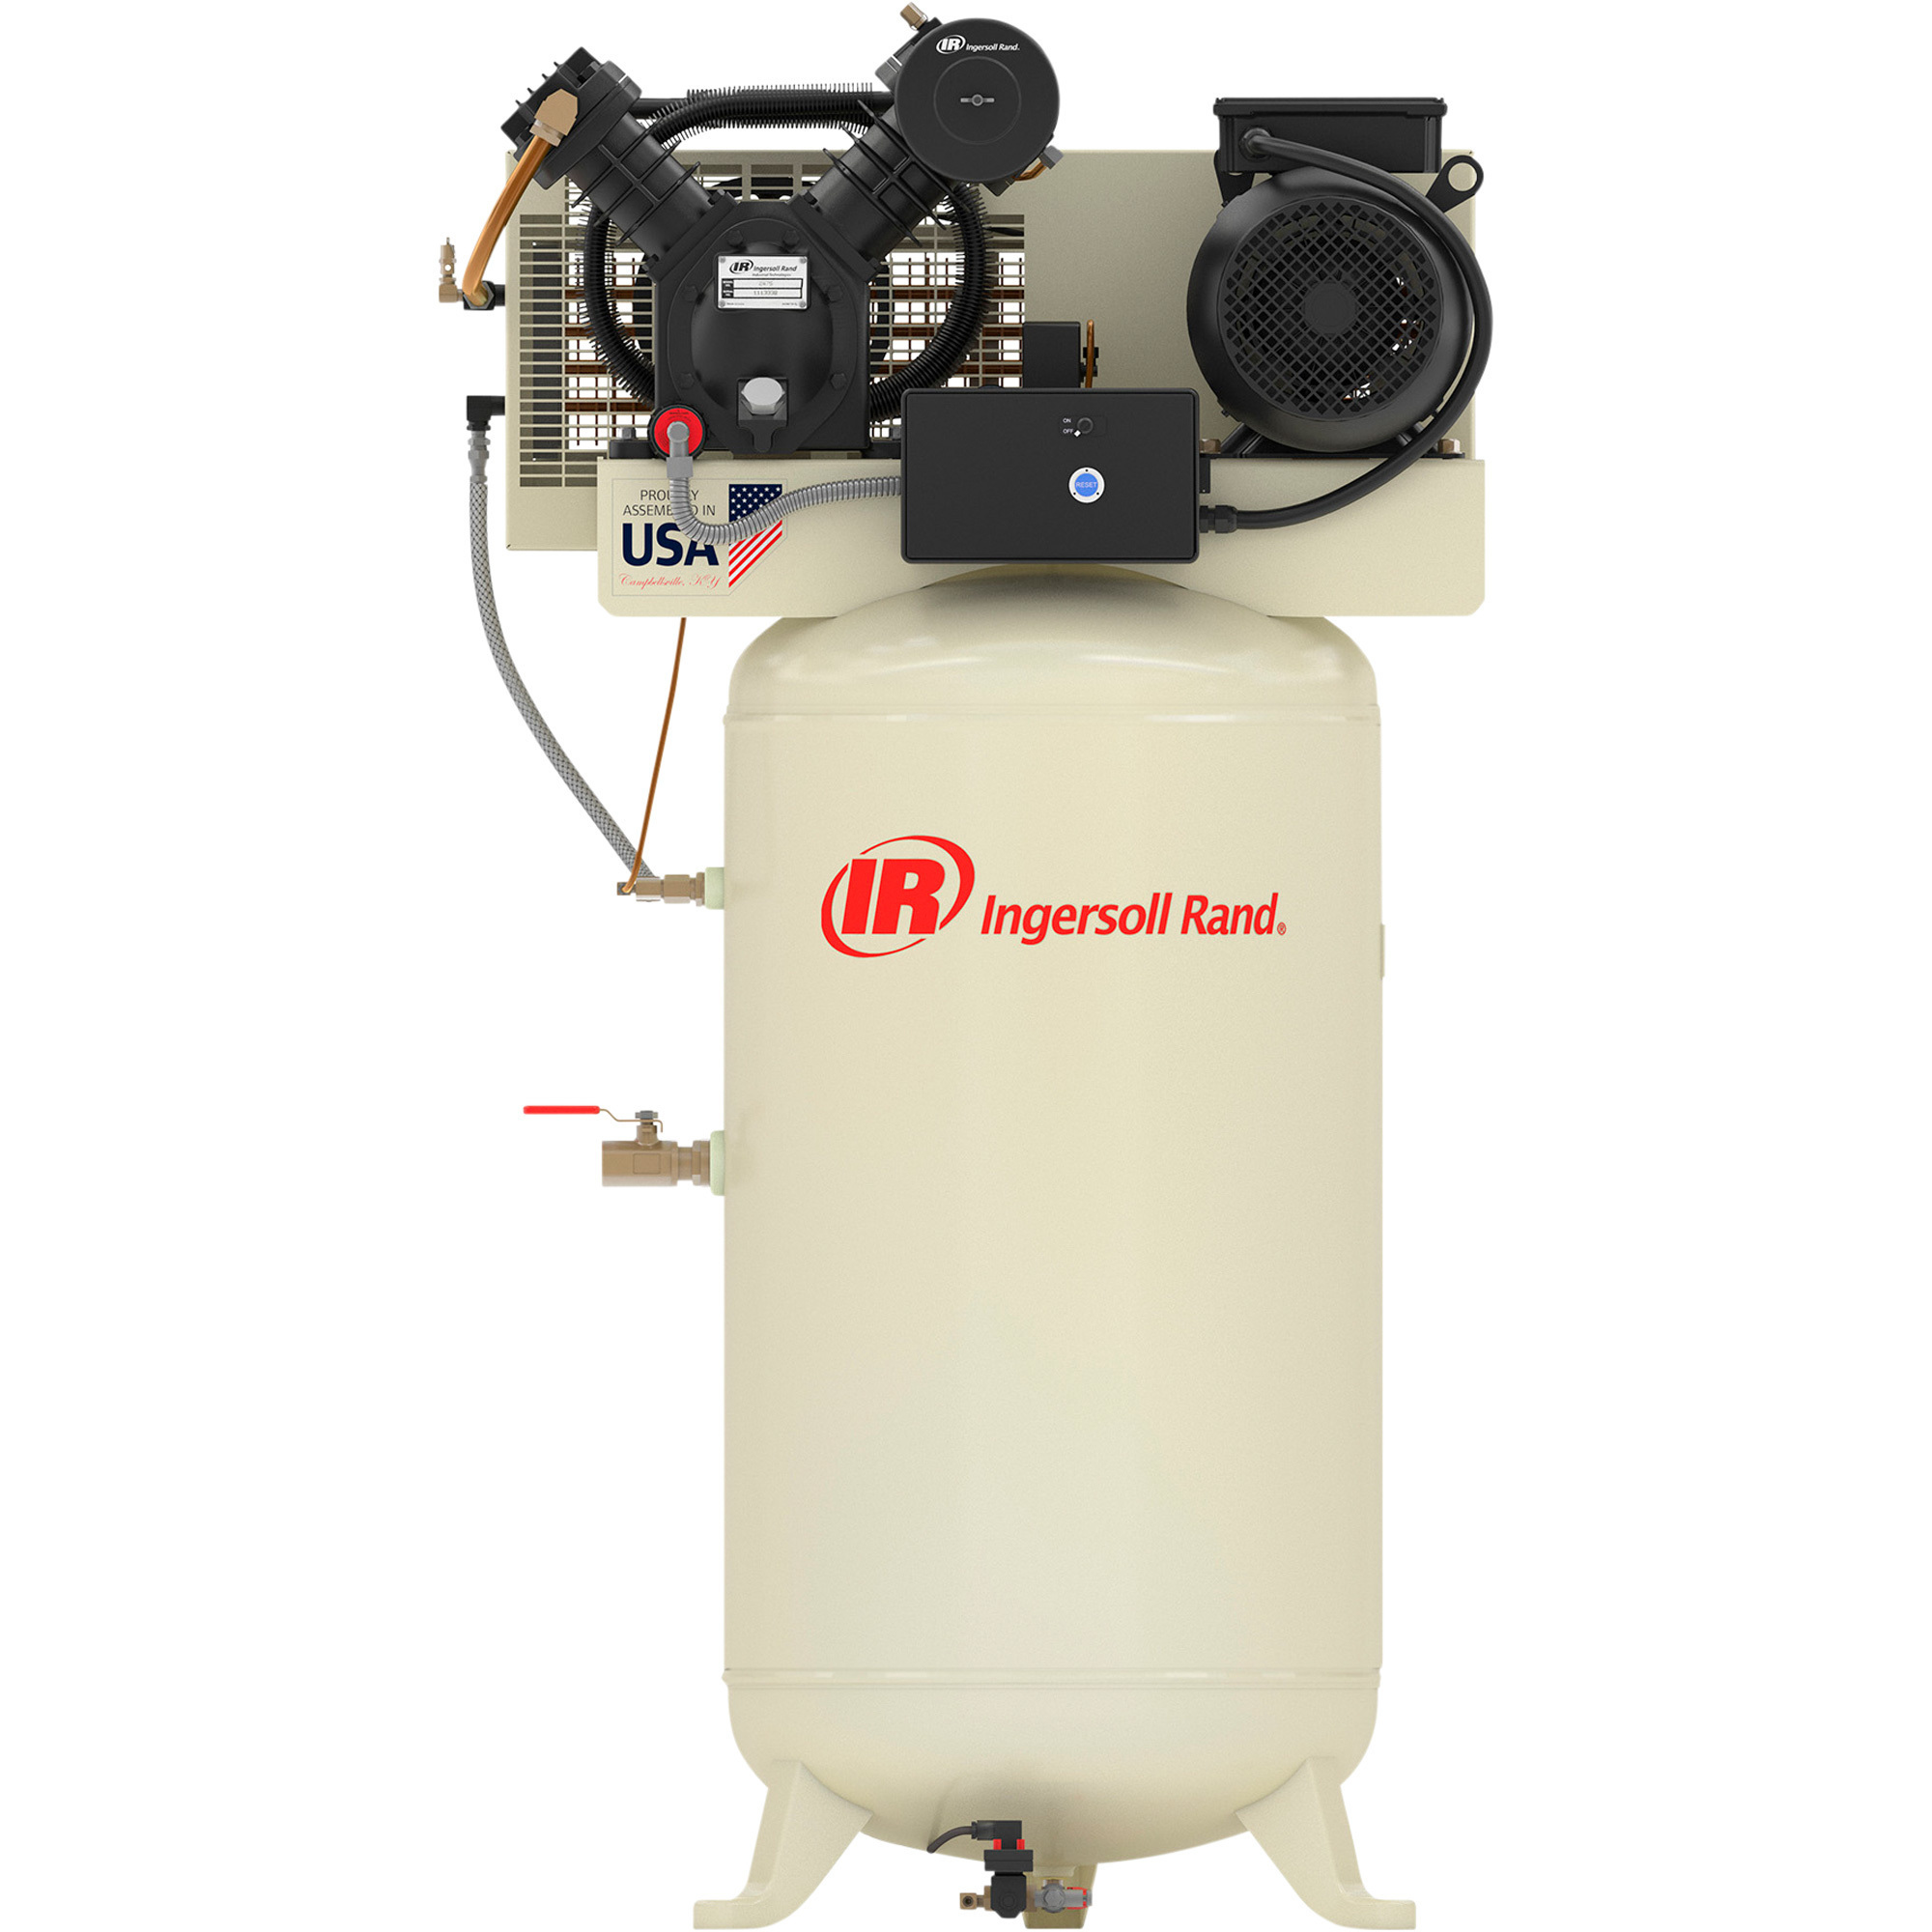 Ingersoll Rand Type-30 Reciprocating Air Compressor (Premium Package) — 7.5 HP, 460 Volt, 3 Phase, 80 Gallon Vertical, Model 2475N7.5-P -  45465564